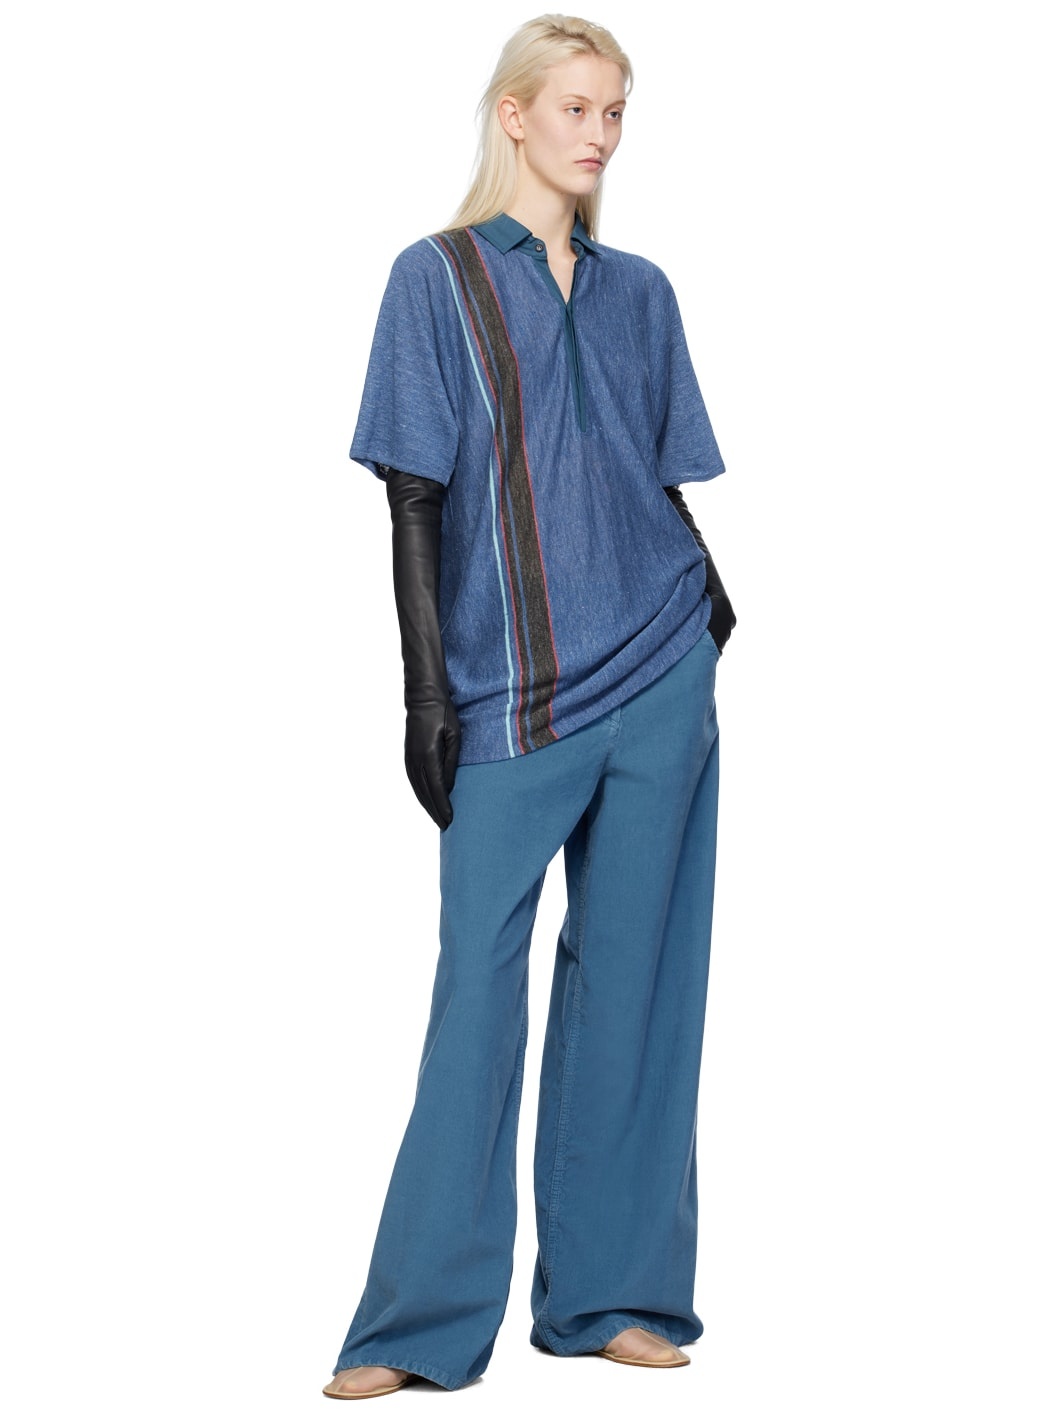 The Row Blue Chani Trousers